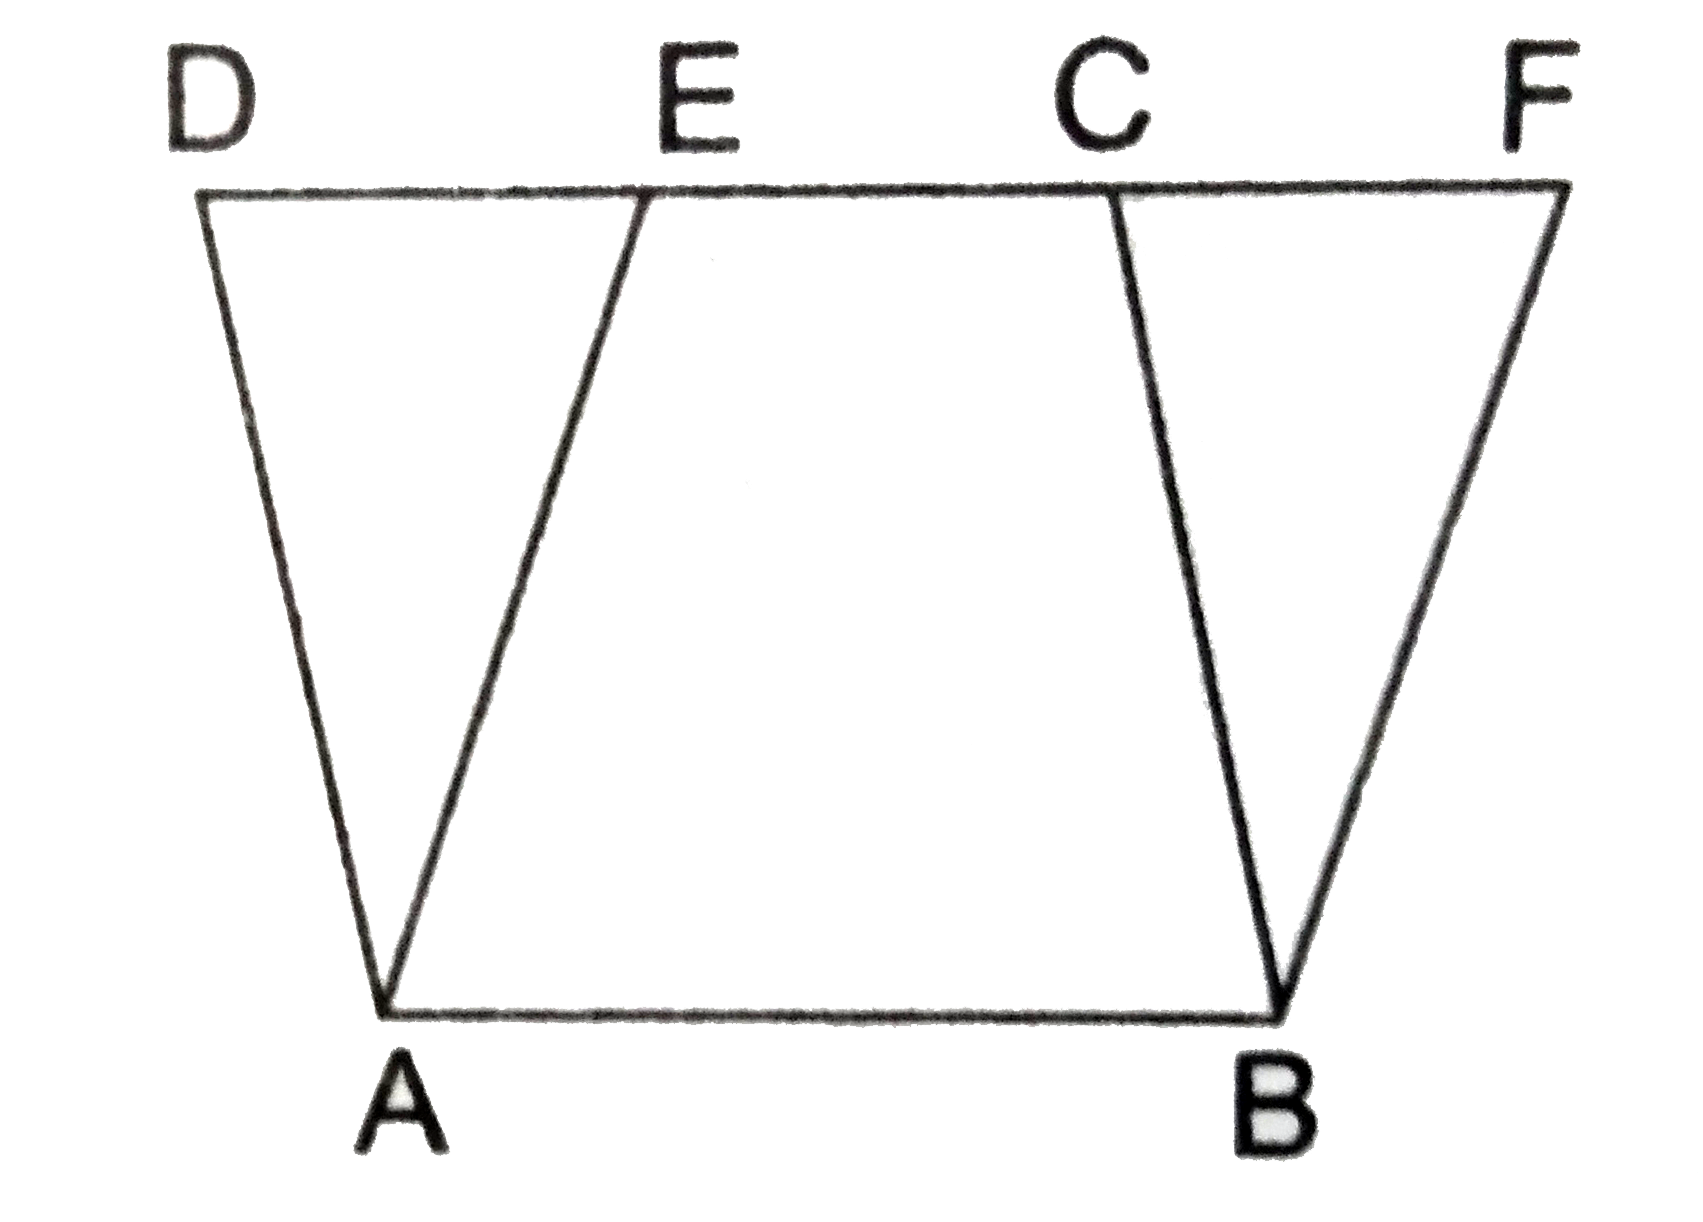 In the given figure, ABCD and ABEF are parallelograms such that ar(quad. EABC)  17 cm^(2) and ar(||gm ABCD) = 25 cm^(2). Then ar(triangleBCF) = ?